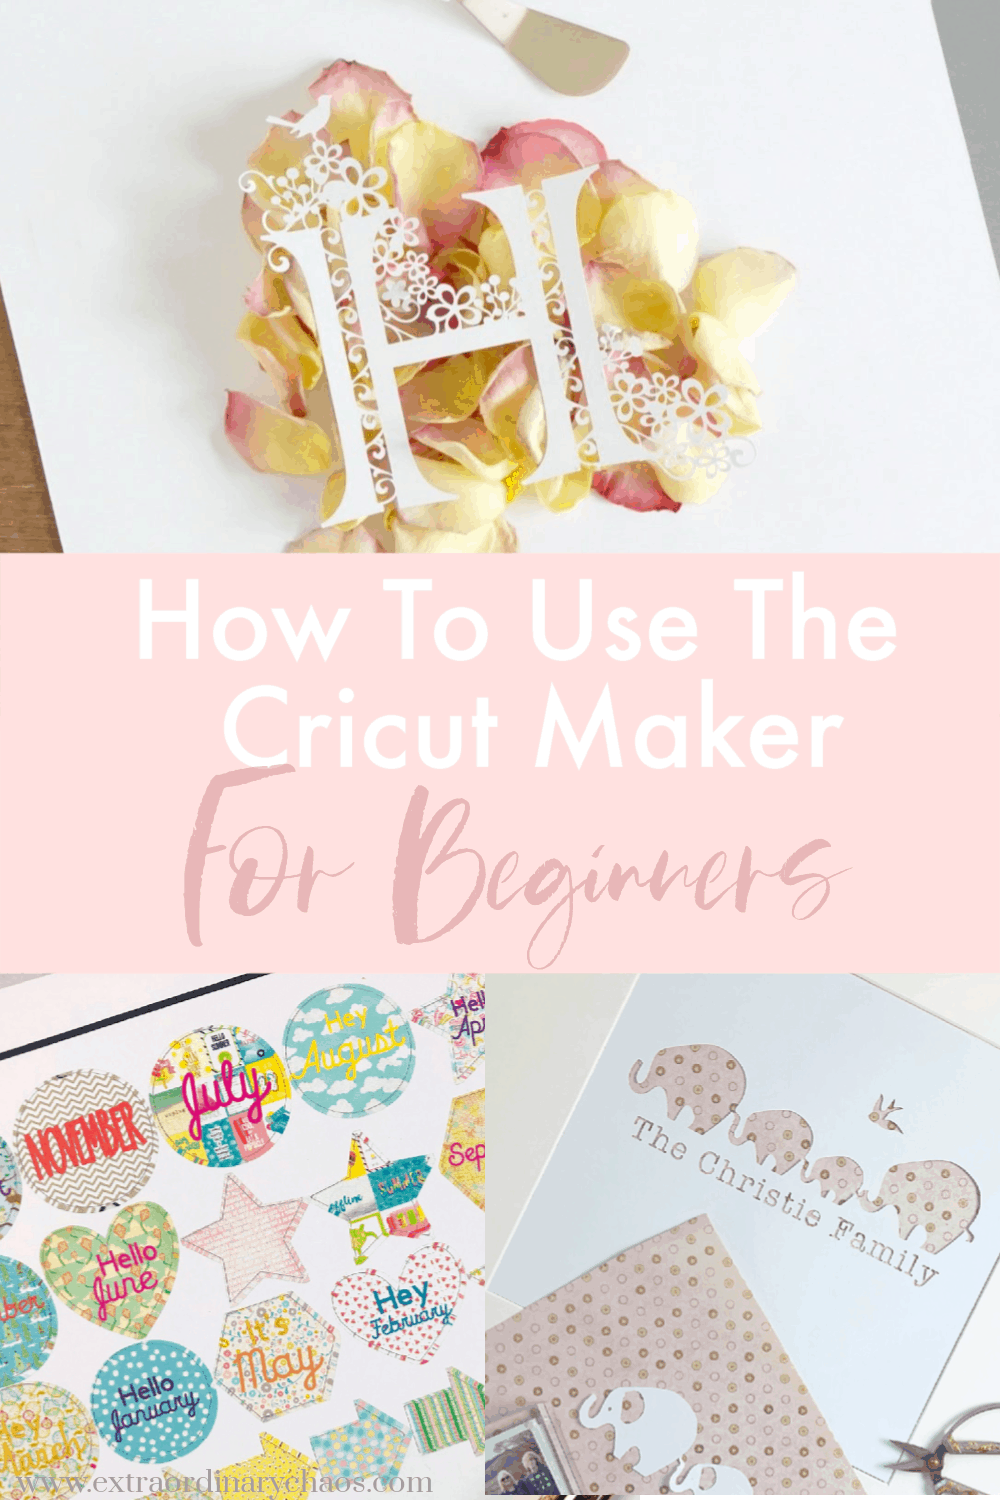 Cricut Maker For Beginners, How To Use